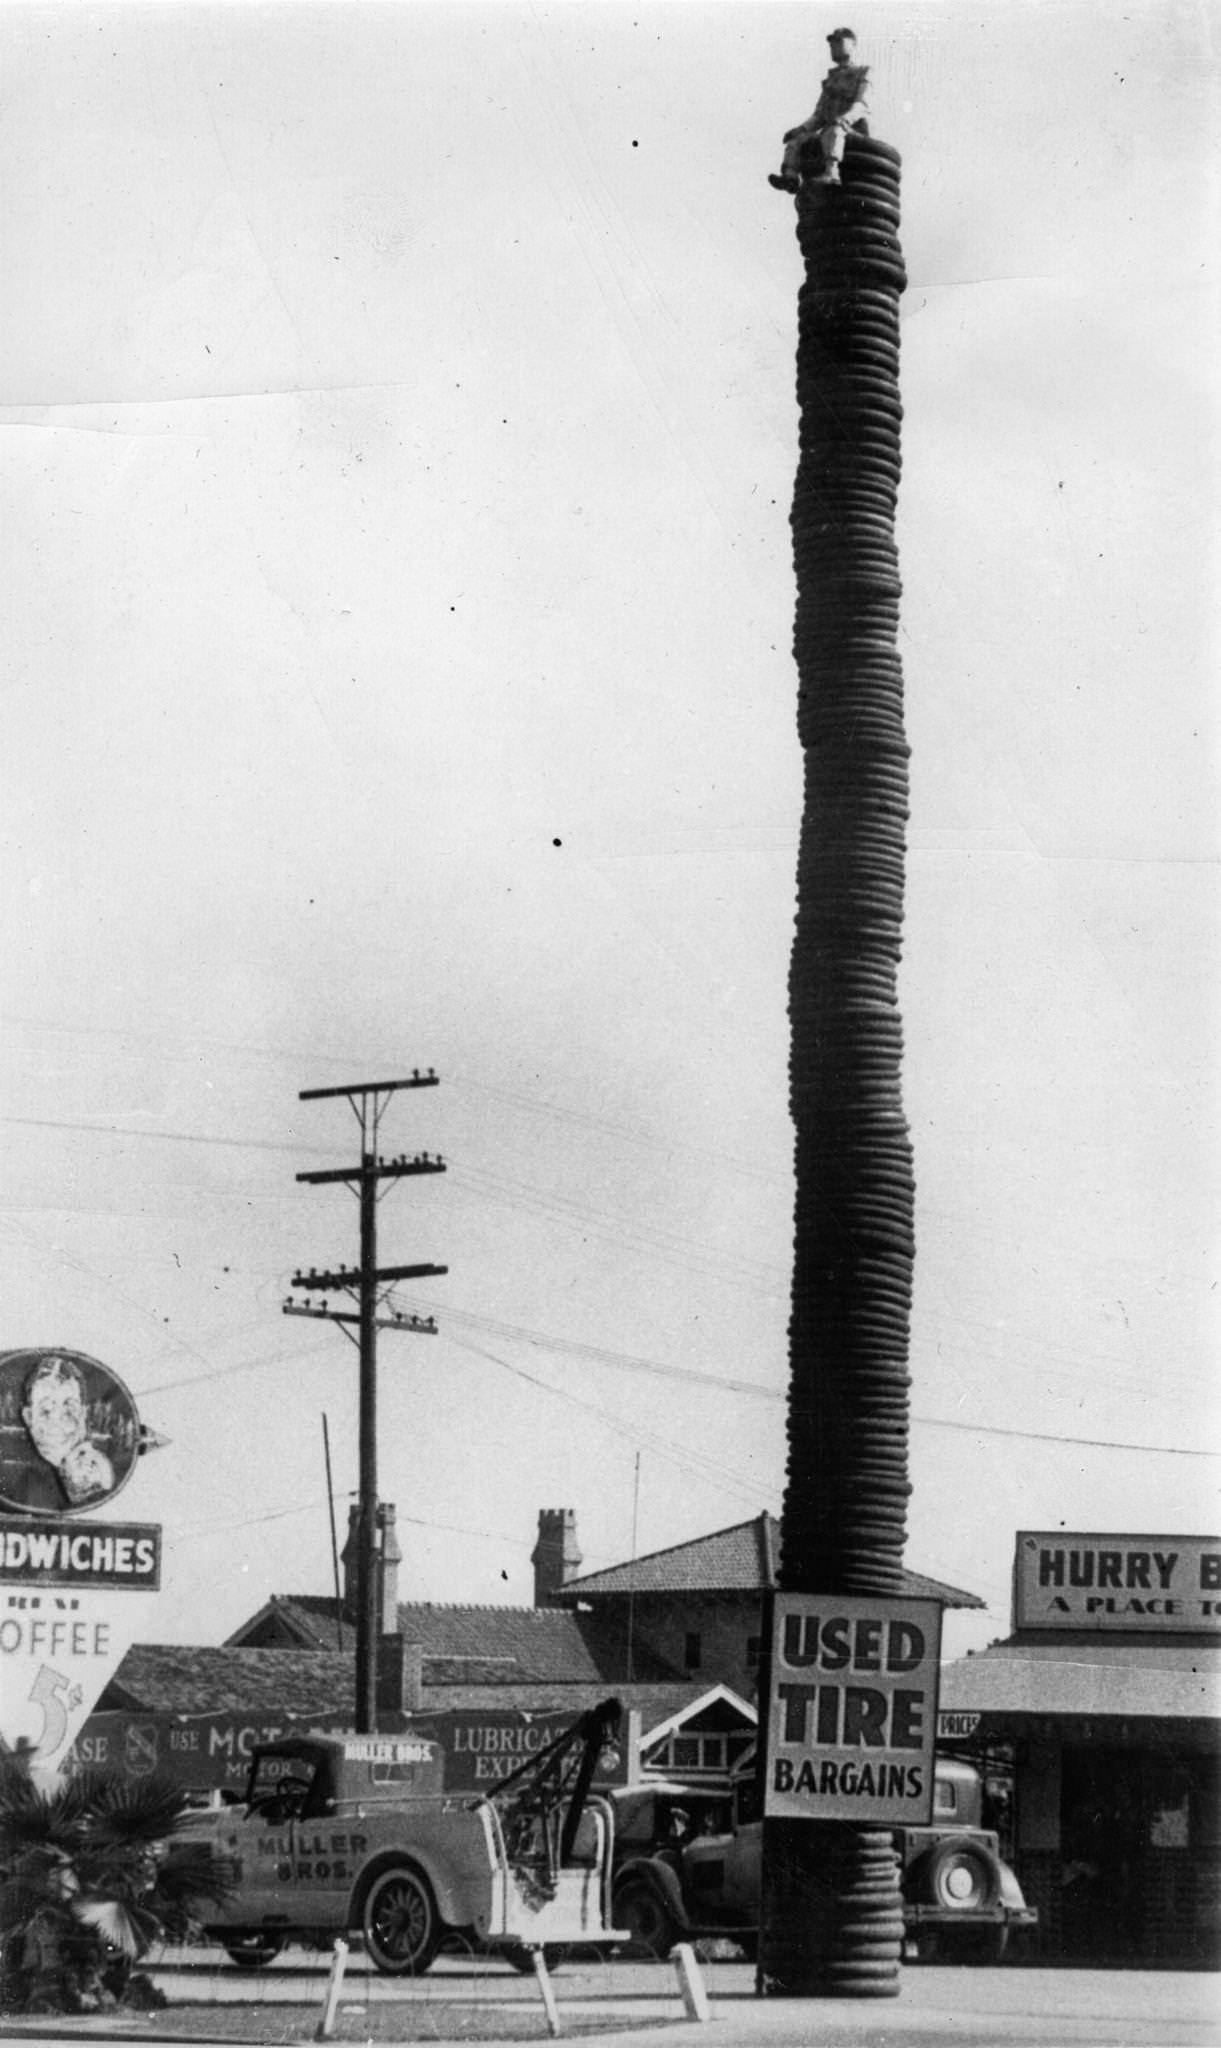 A record breaking stack of tires is used as advertisement at Hollywood, California. To attract attention to a large stock of used tires two salesmen put a lifelike dummy sitting on the top. 2044